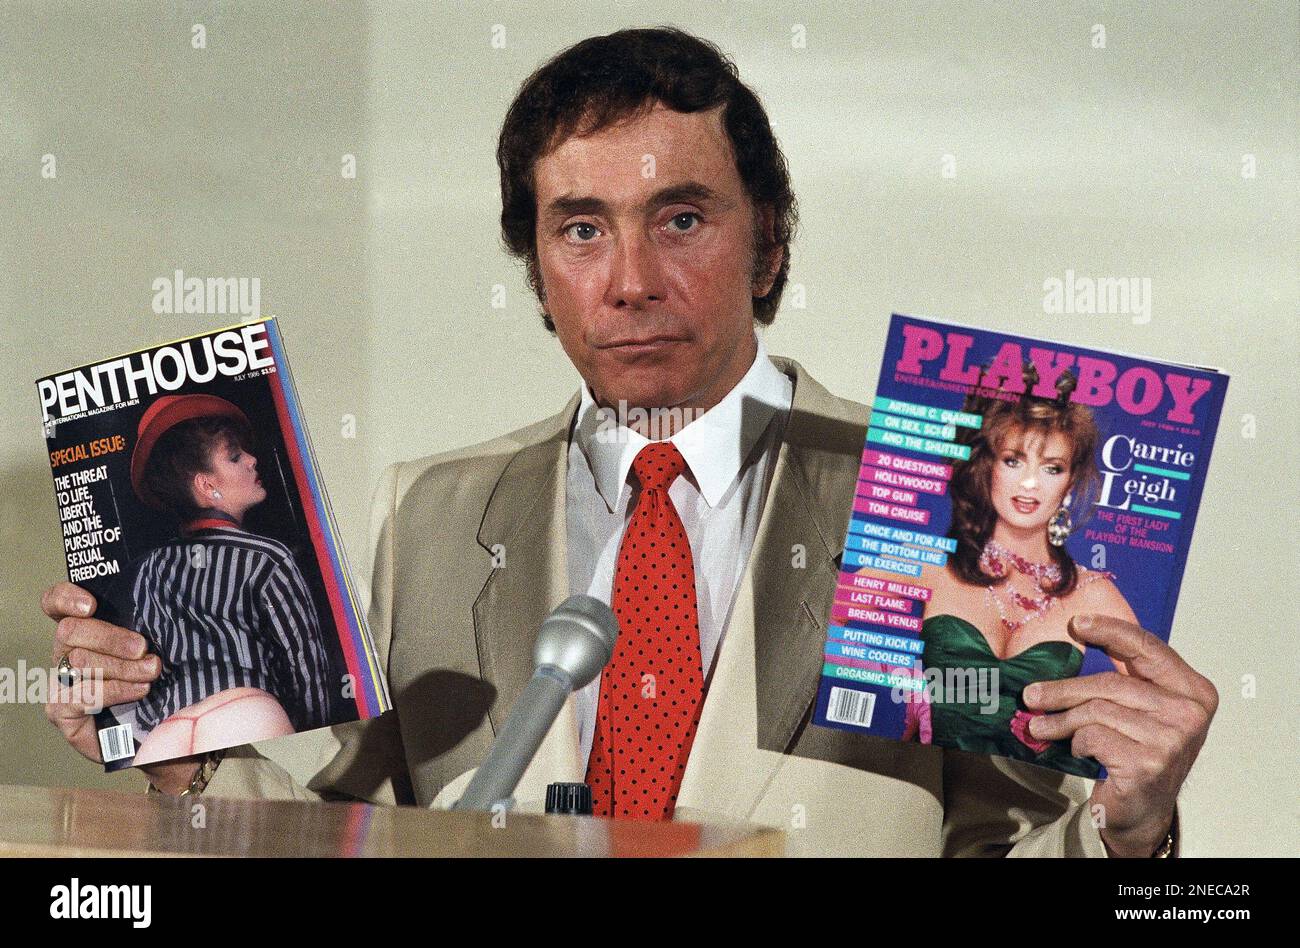 Bob Guccione, publisher of Penthouse magazine, holds up copies of Penthouse and Playboy magazines during a news conference in New York, June 5, 1986 photo